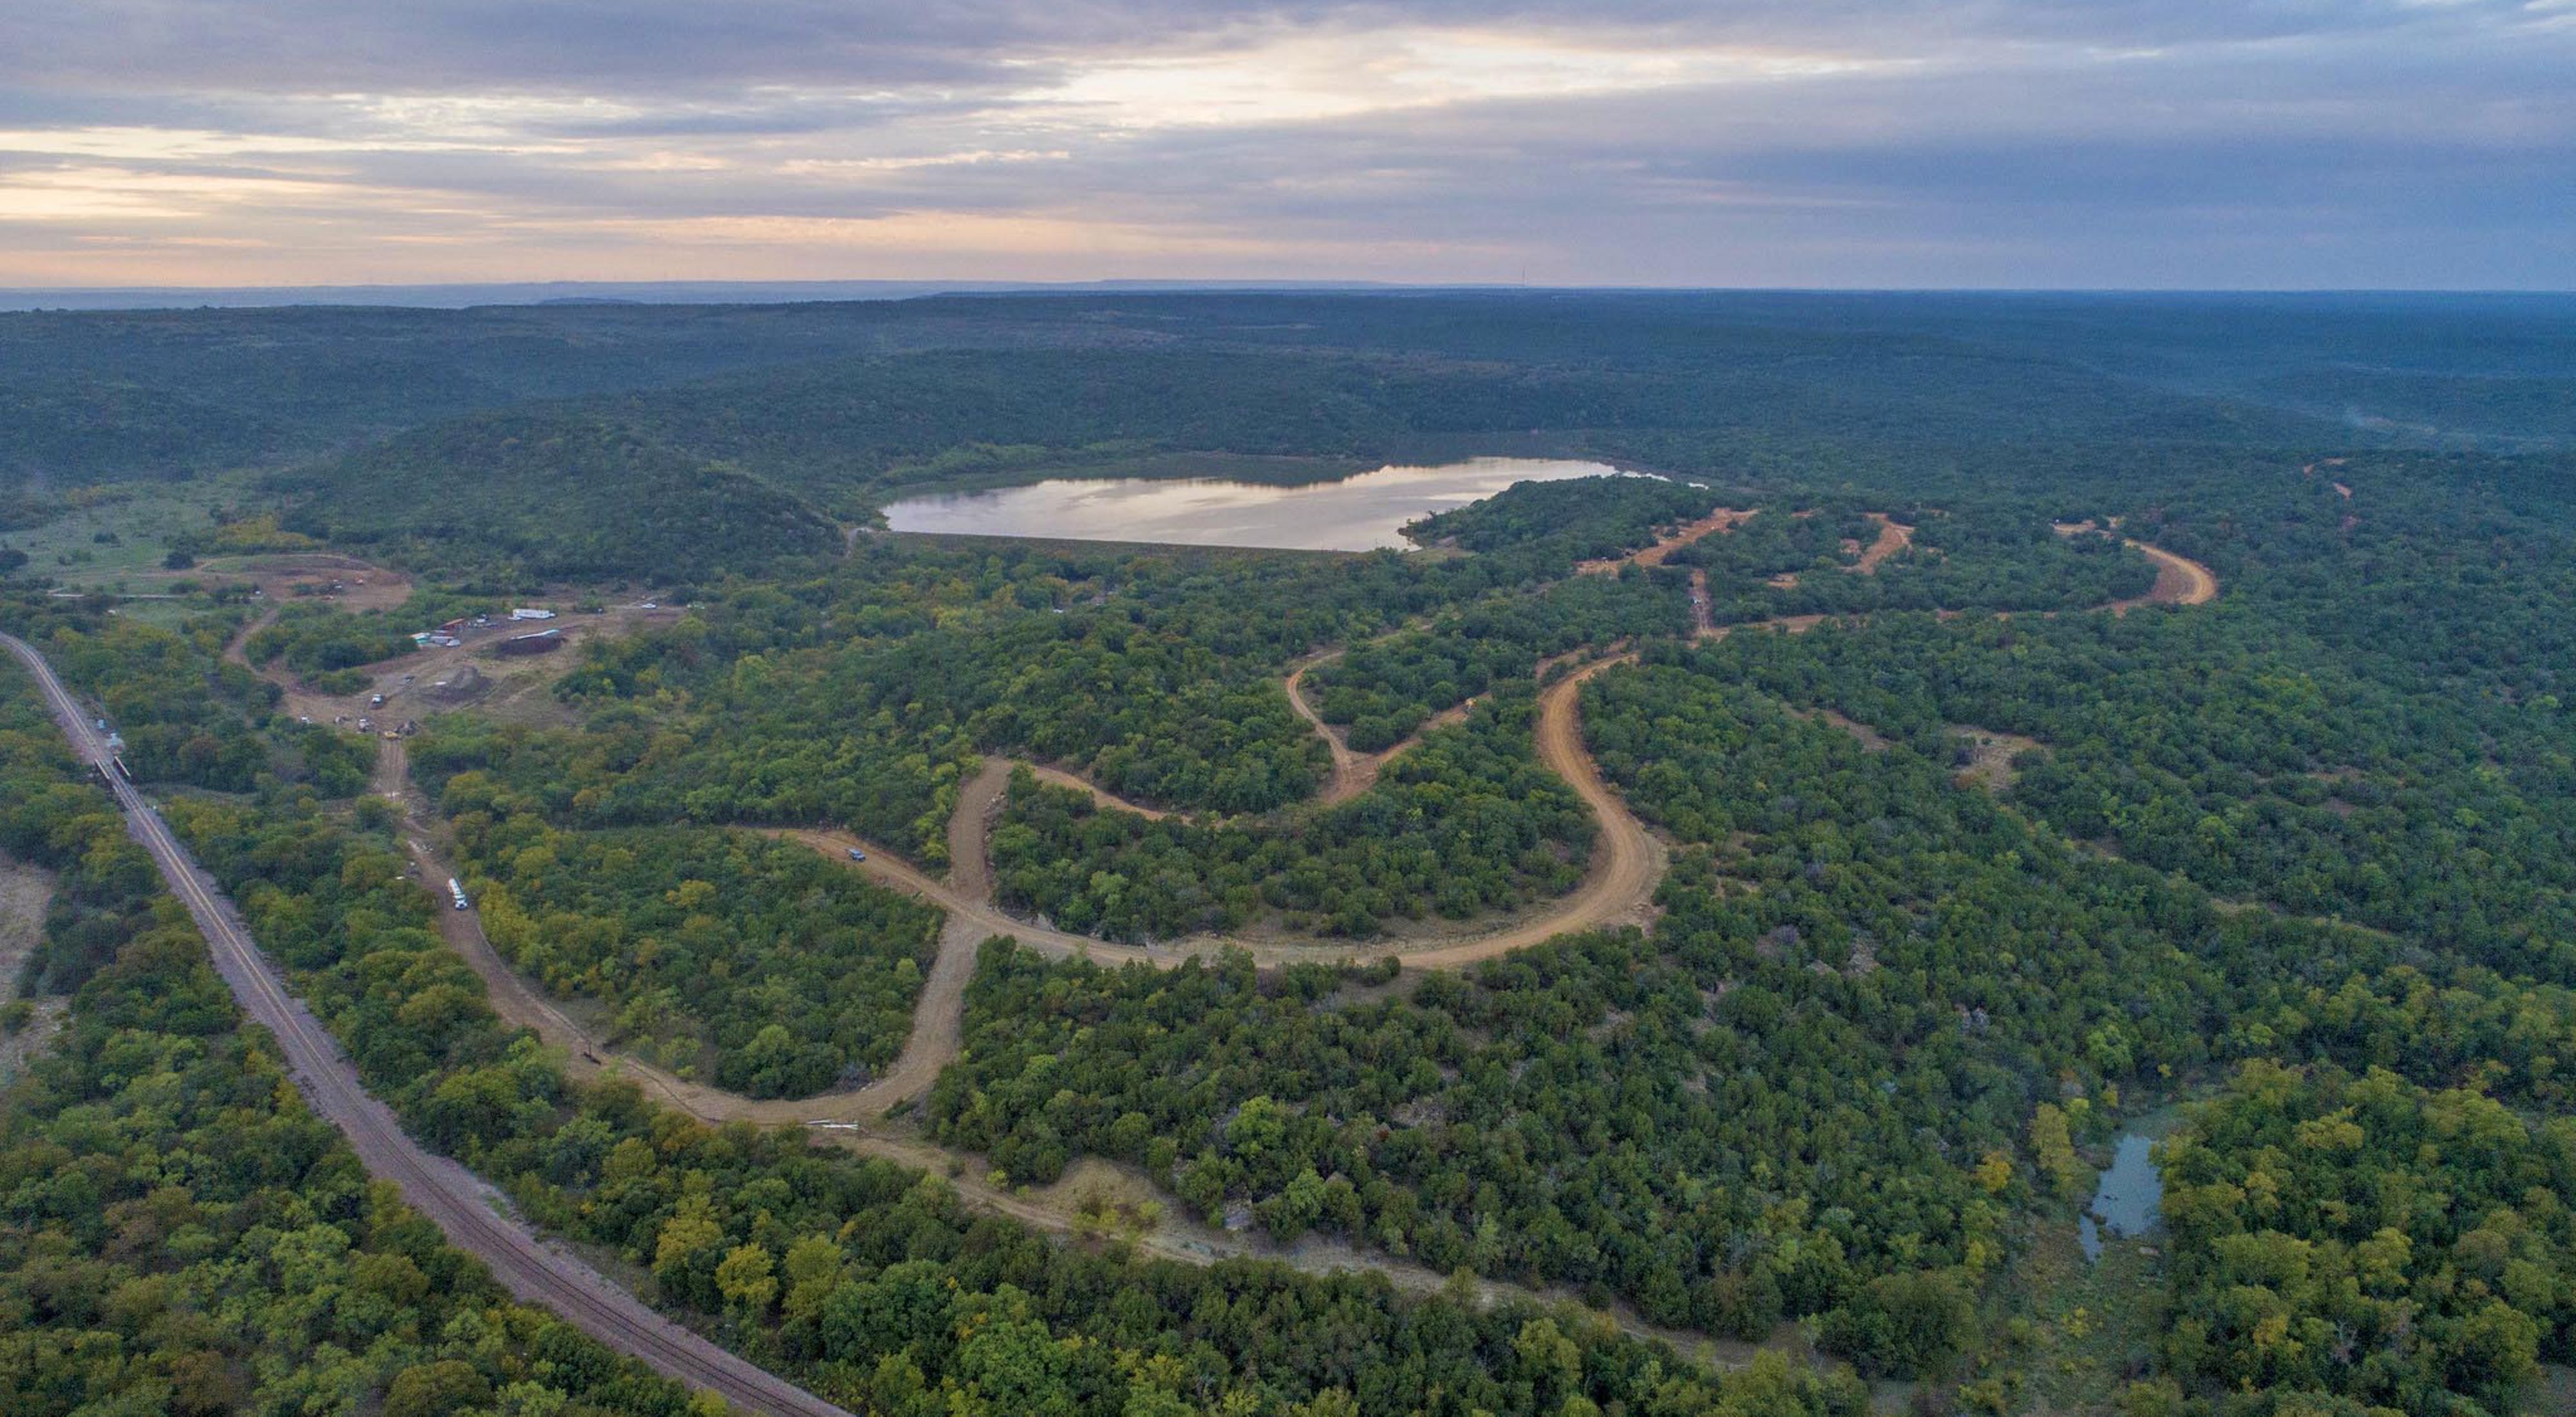 Aerial view of an expanse of green forest and twisting dirt roads with a lake in the middle.